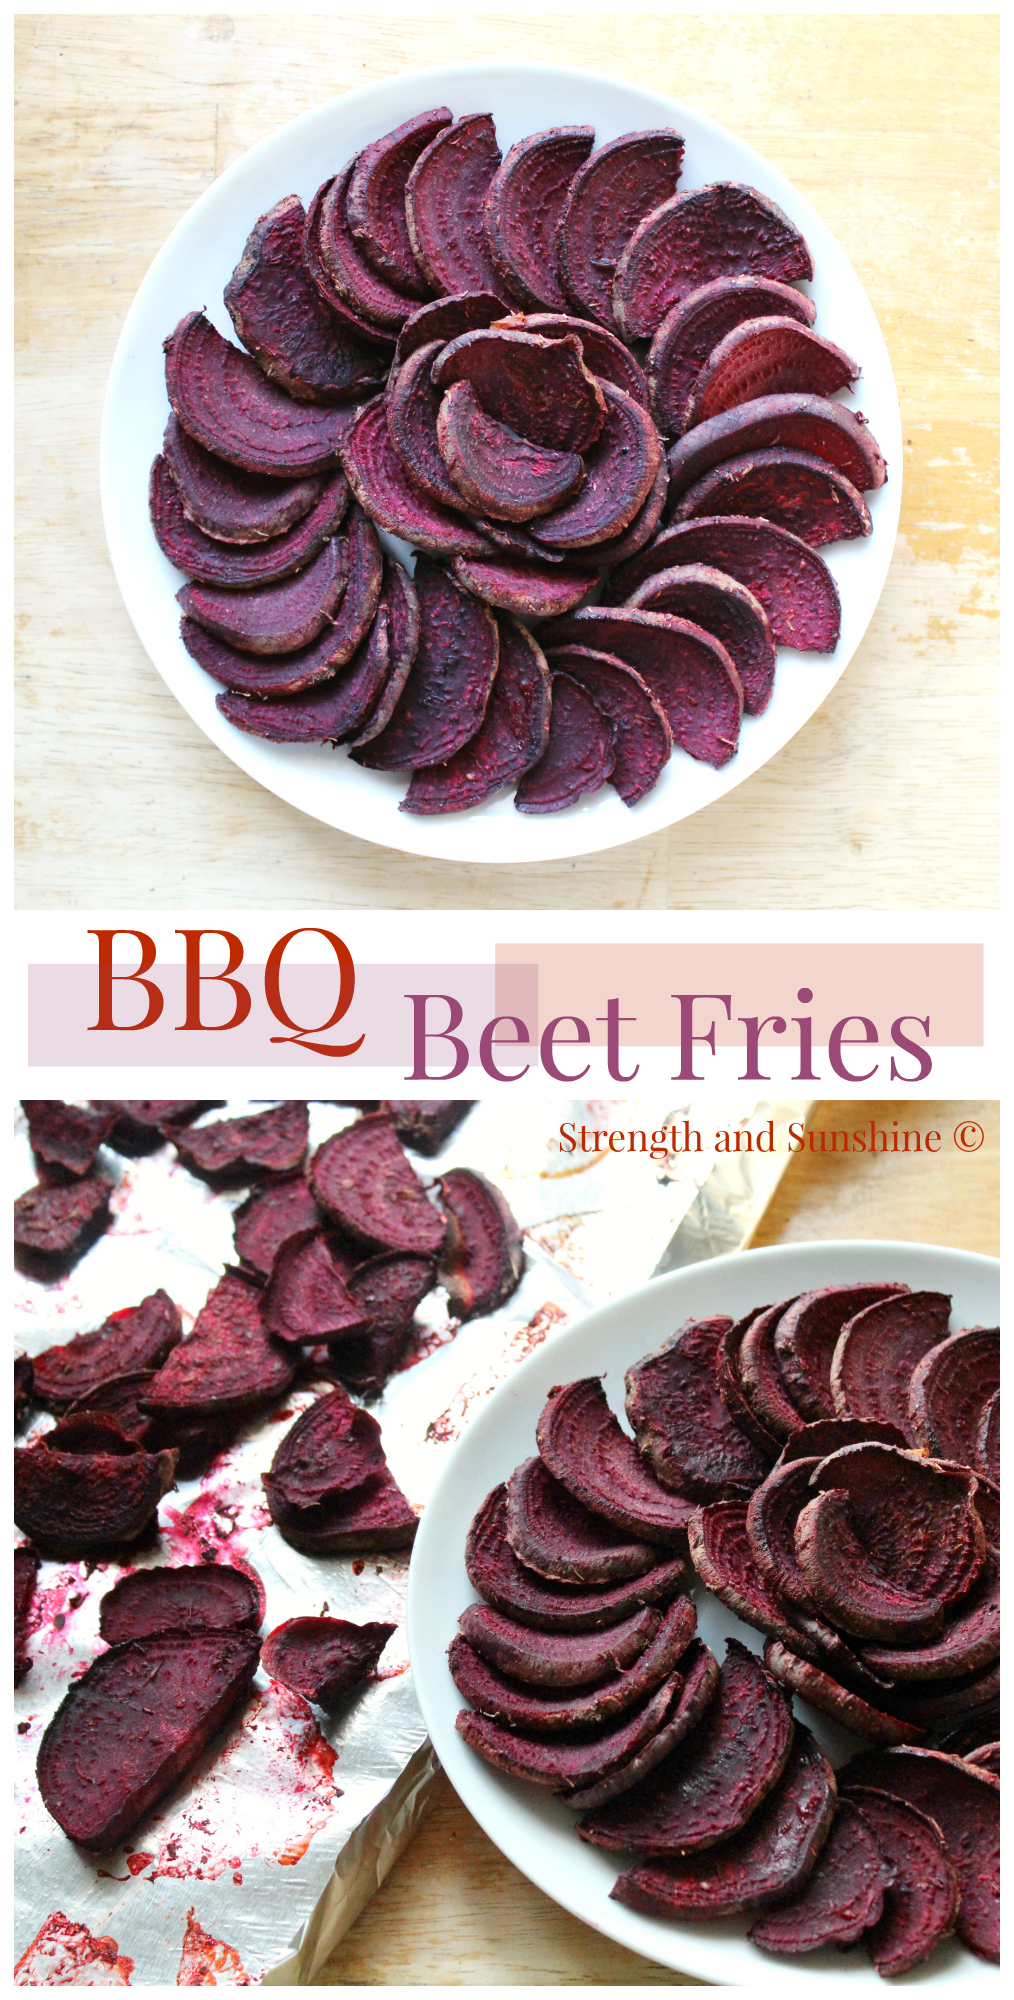 BBQ Beet Fries | Strength and Sunshine @RebeccaGF666 The perfect low-carb baked fry recipe that's gluten-free, vegan, and paleo to fit every dietary need while still being a delicious summer staple!